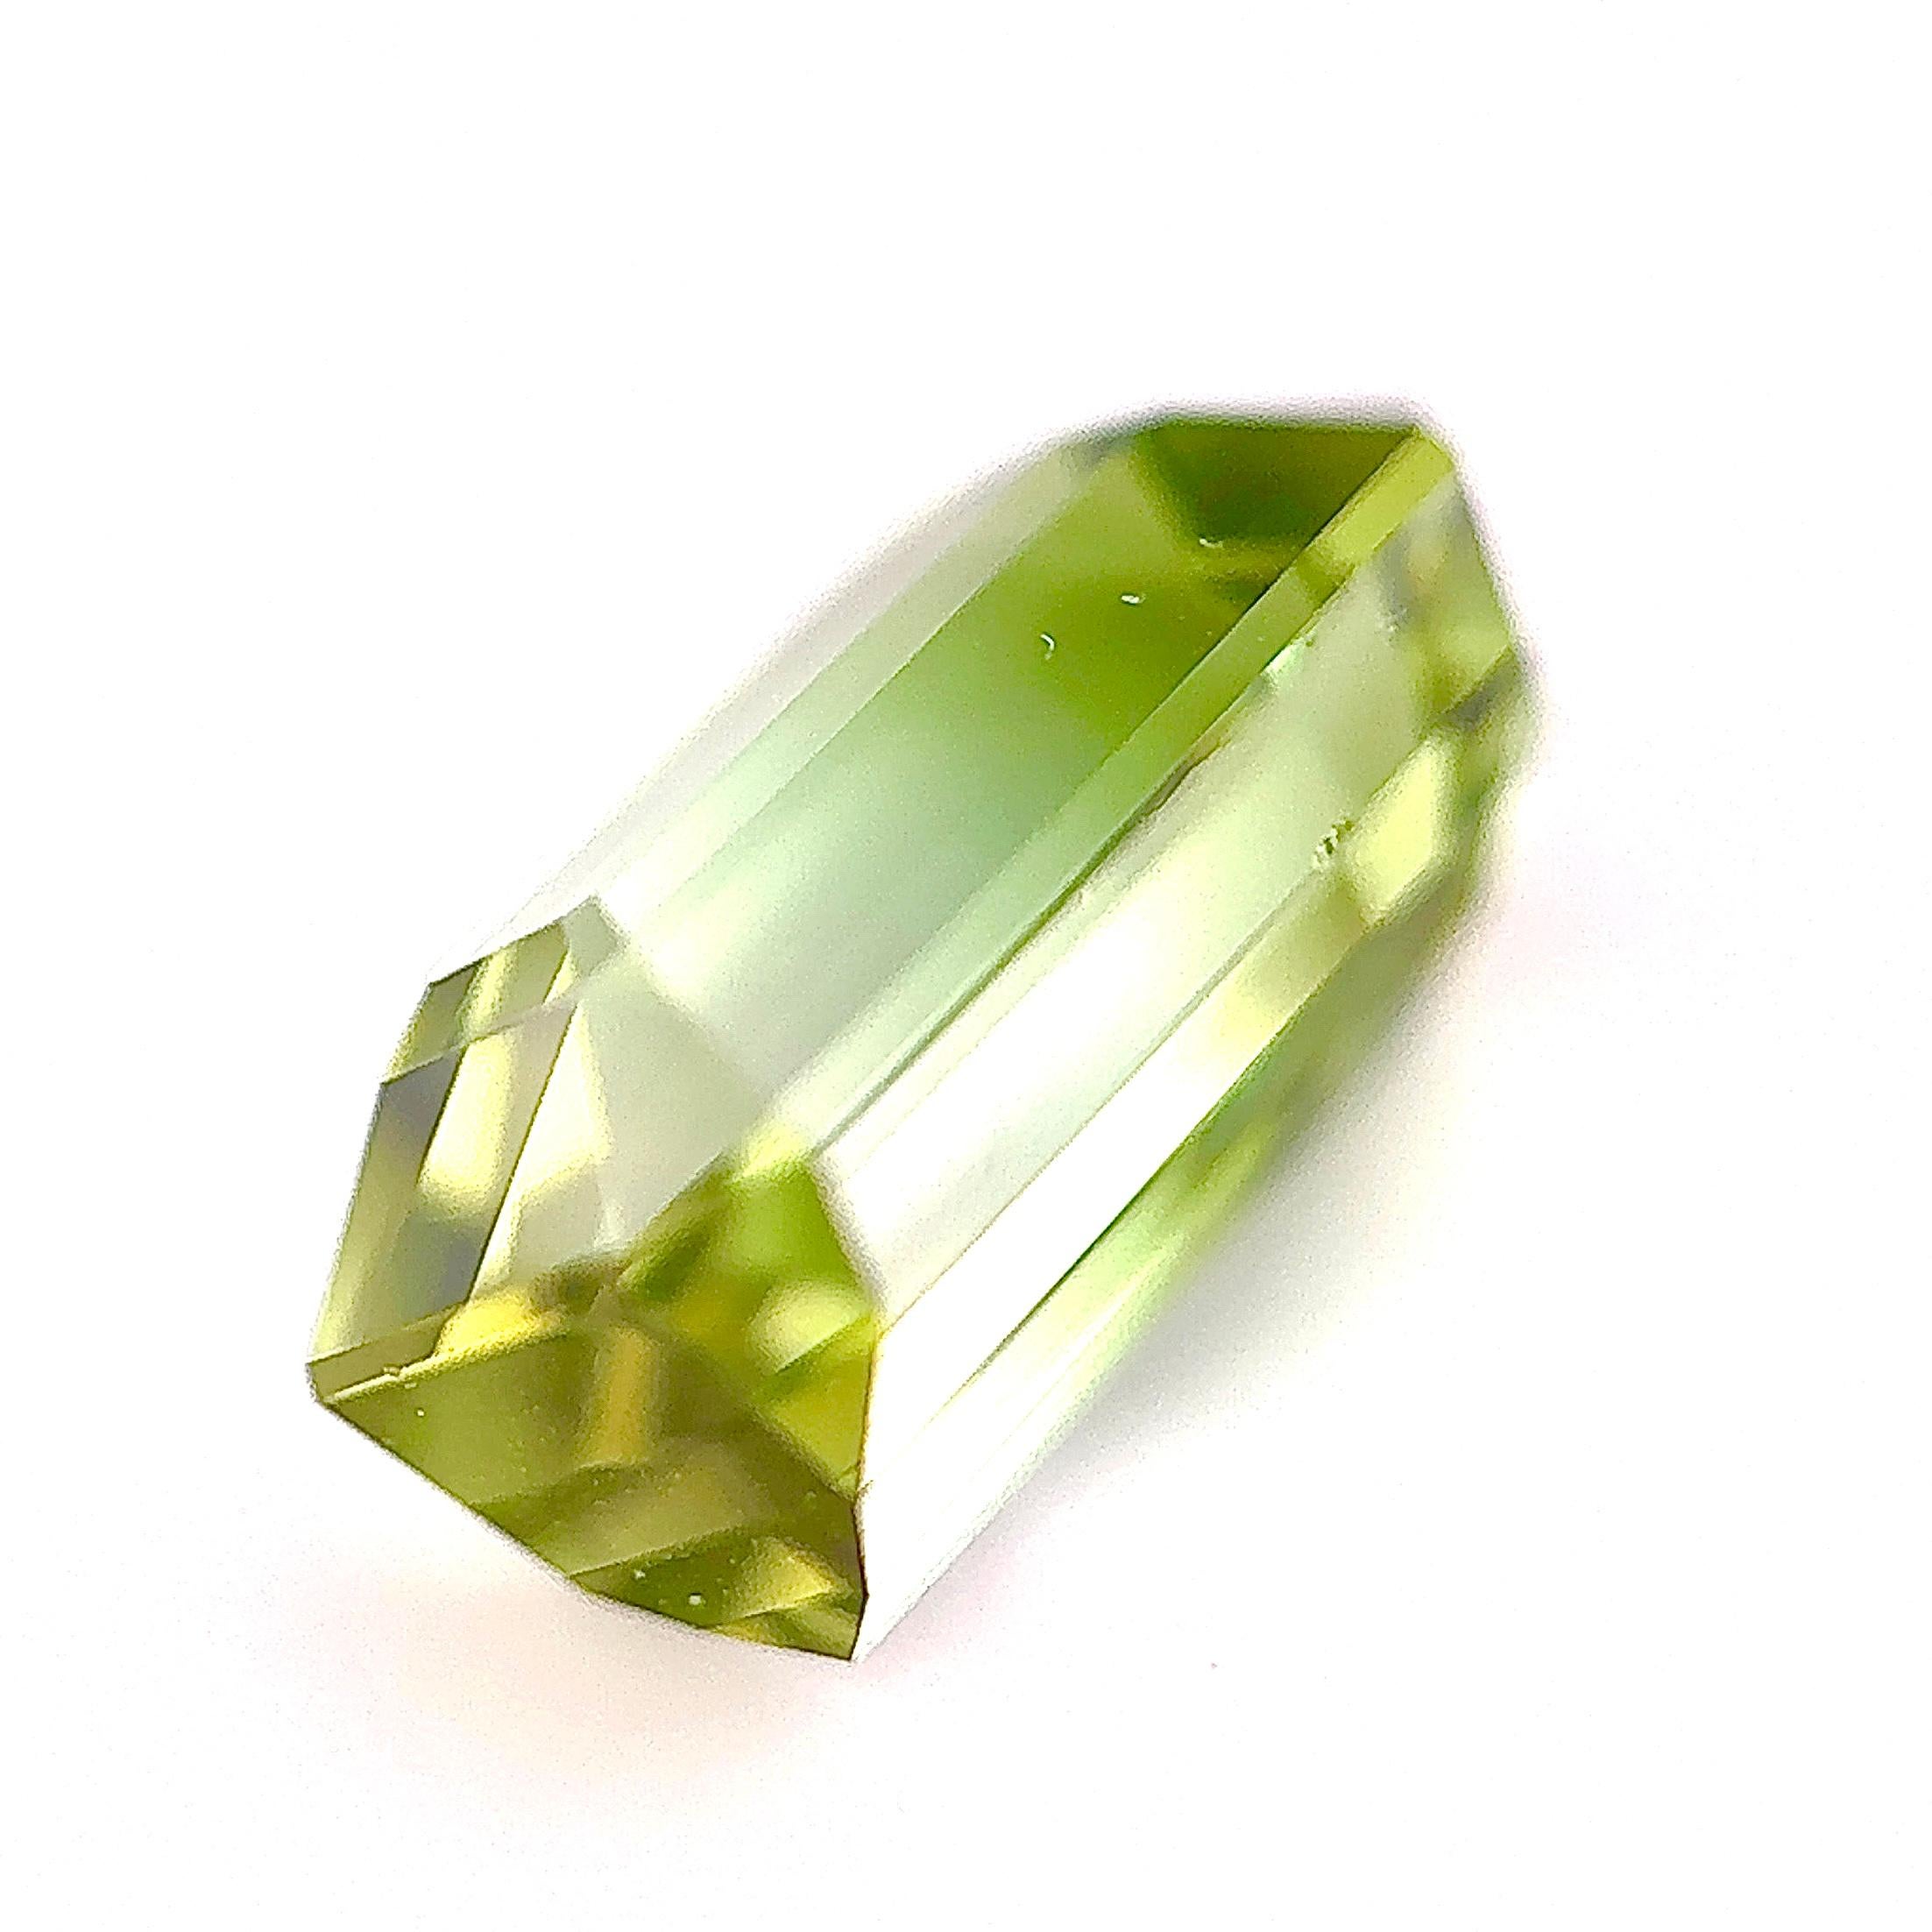 4 Carat Natural Bi Color Tourmaline Loose stone in Green and White 

GRS/GCS/GIA appointed lab certificate can be arranged upon request

To design your own jewellery, Xuelai Jewellery London offers a world-class bespoke experience for private